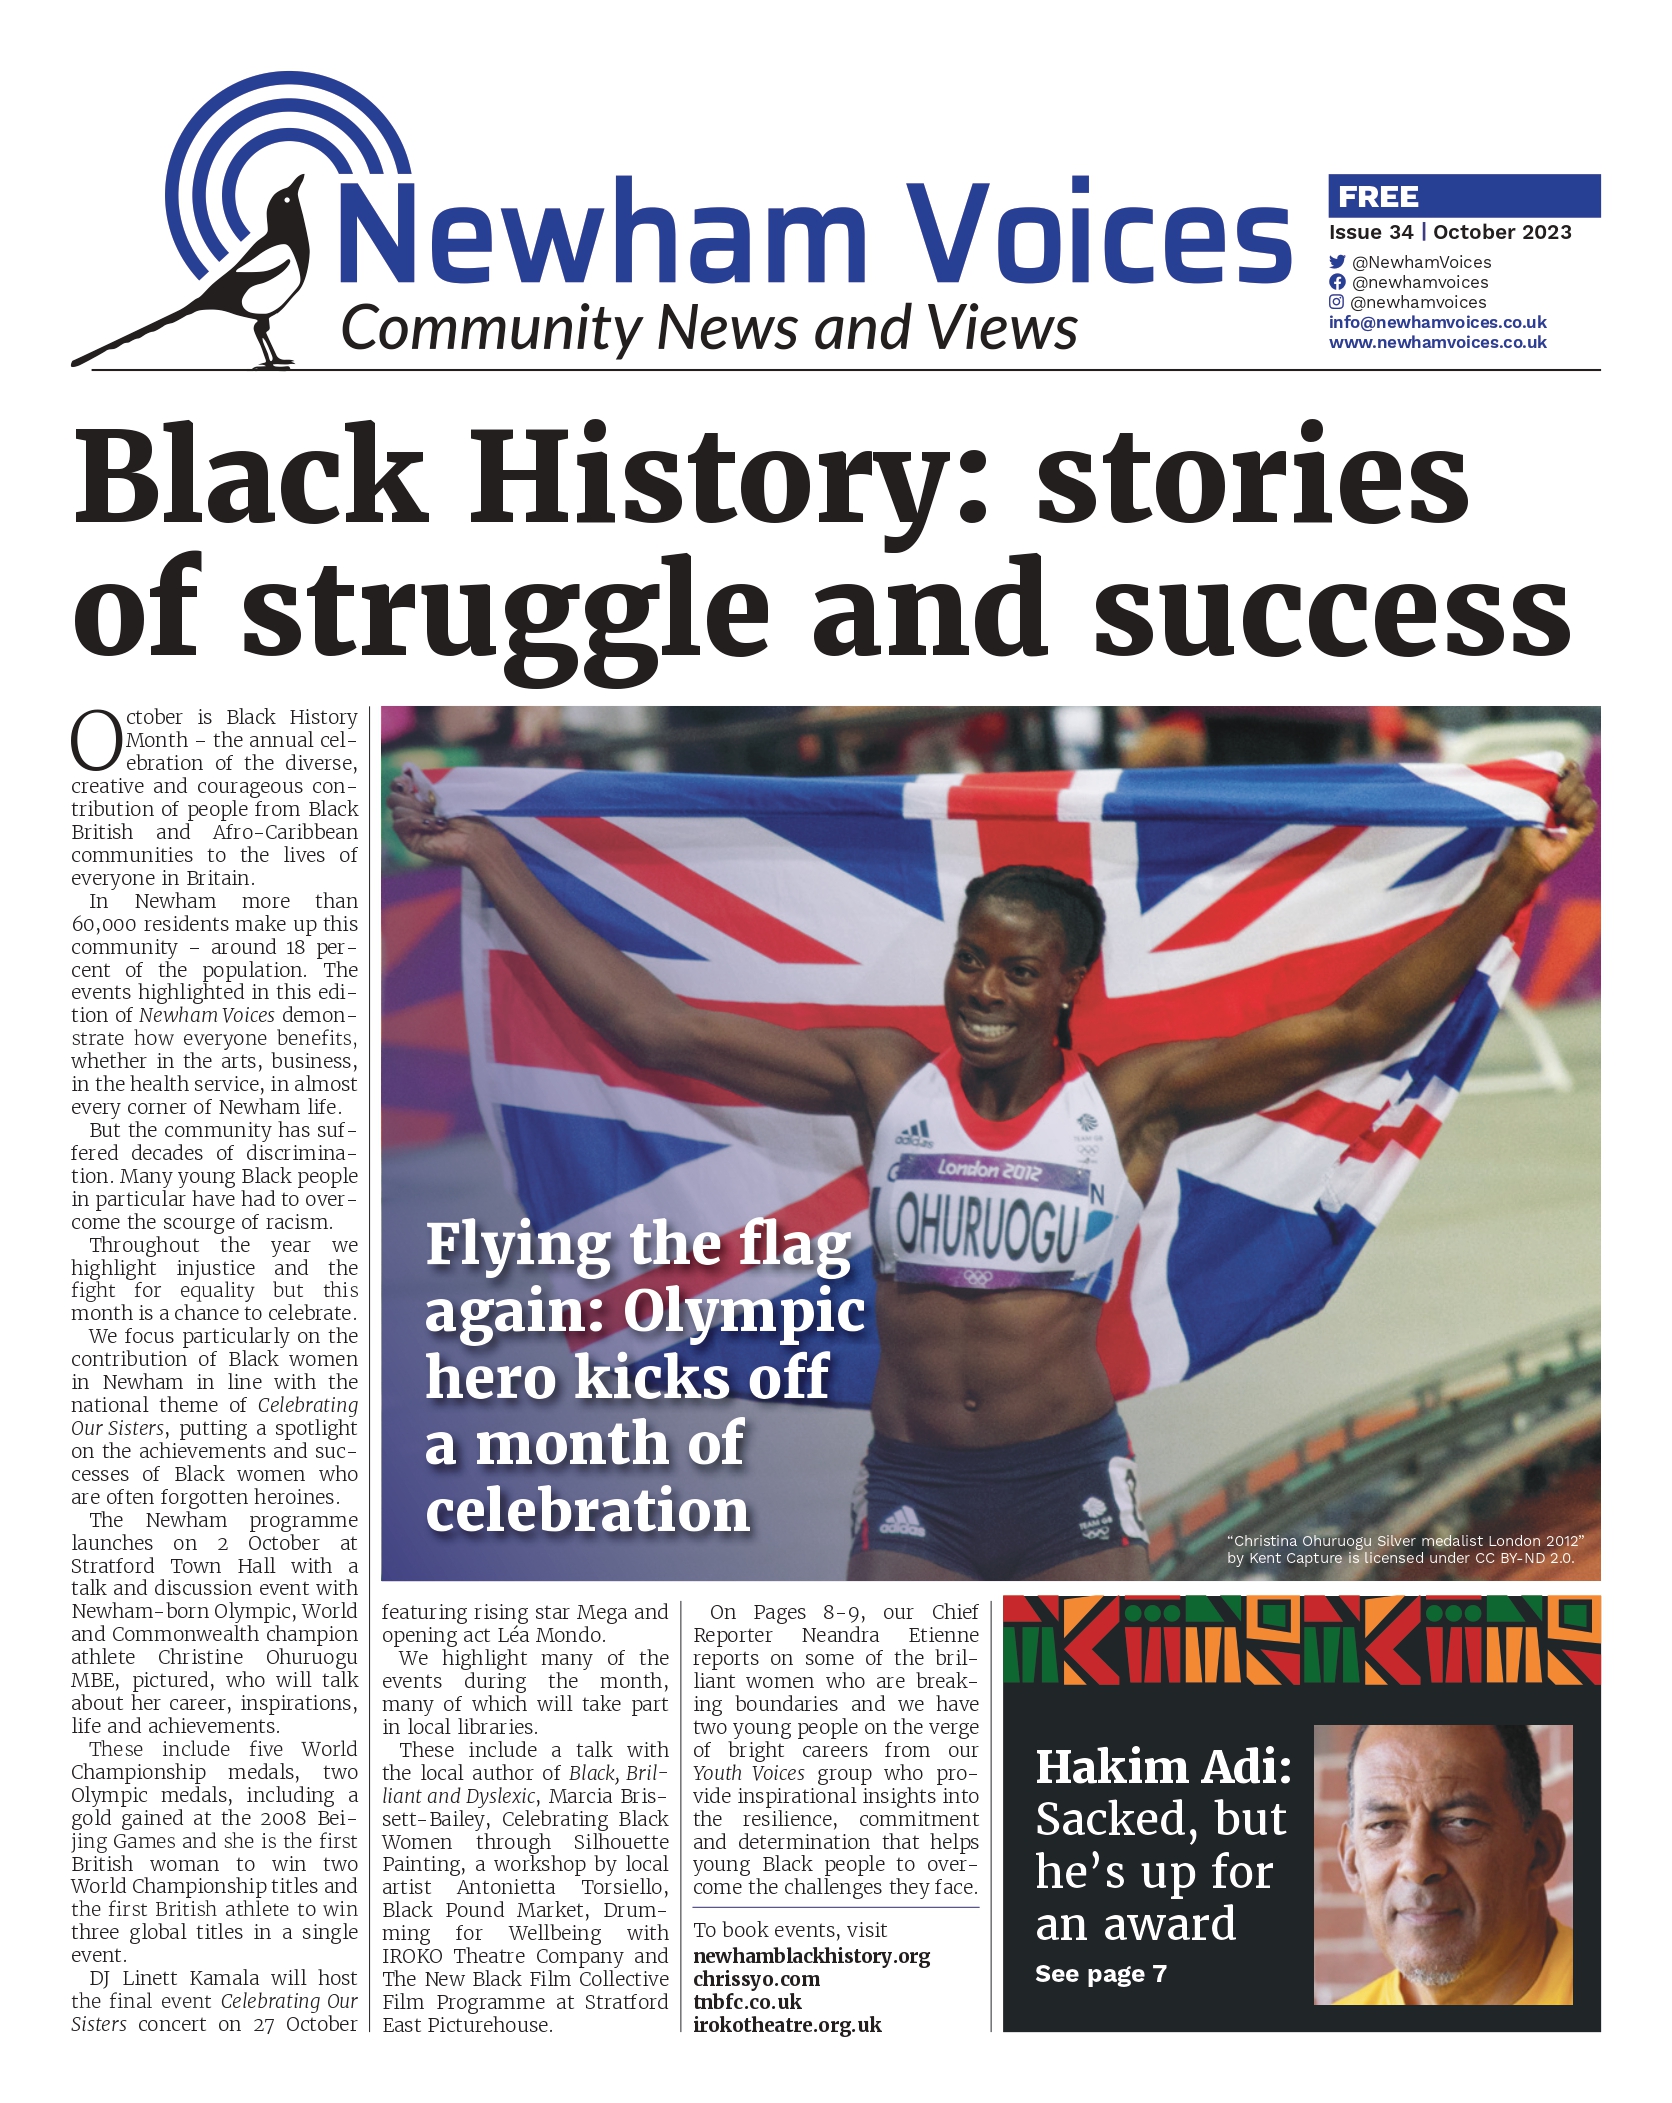 The cover of October 2023's Newham Voices. Main headline: Black History: stories of struggle and success